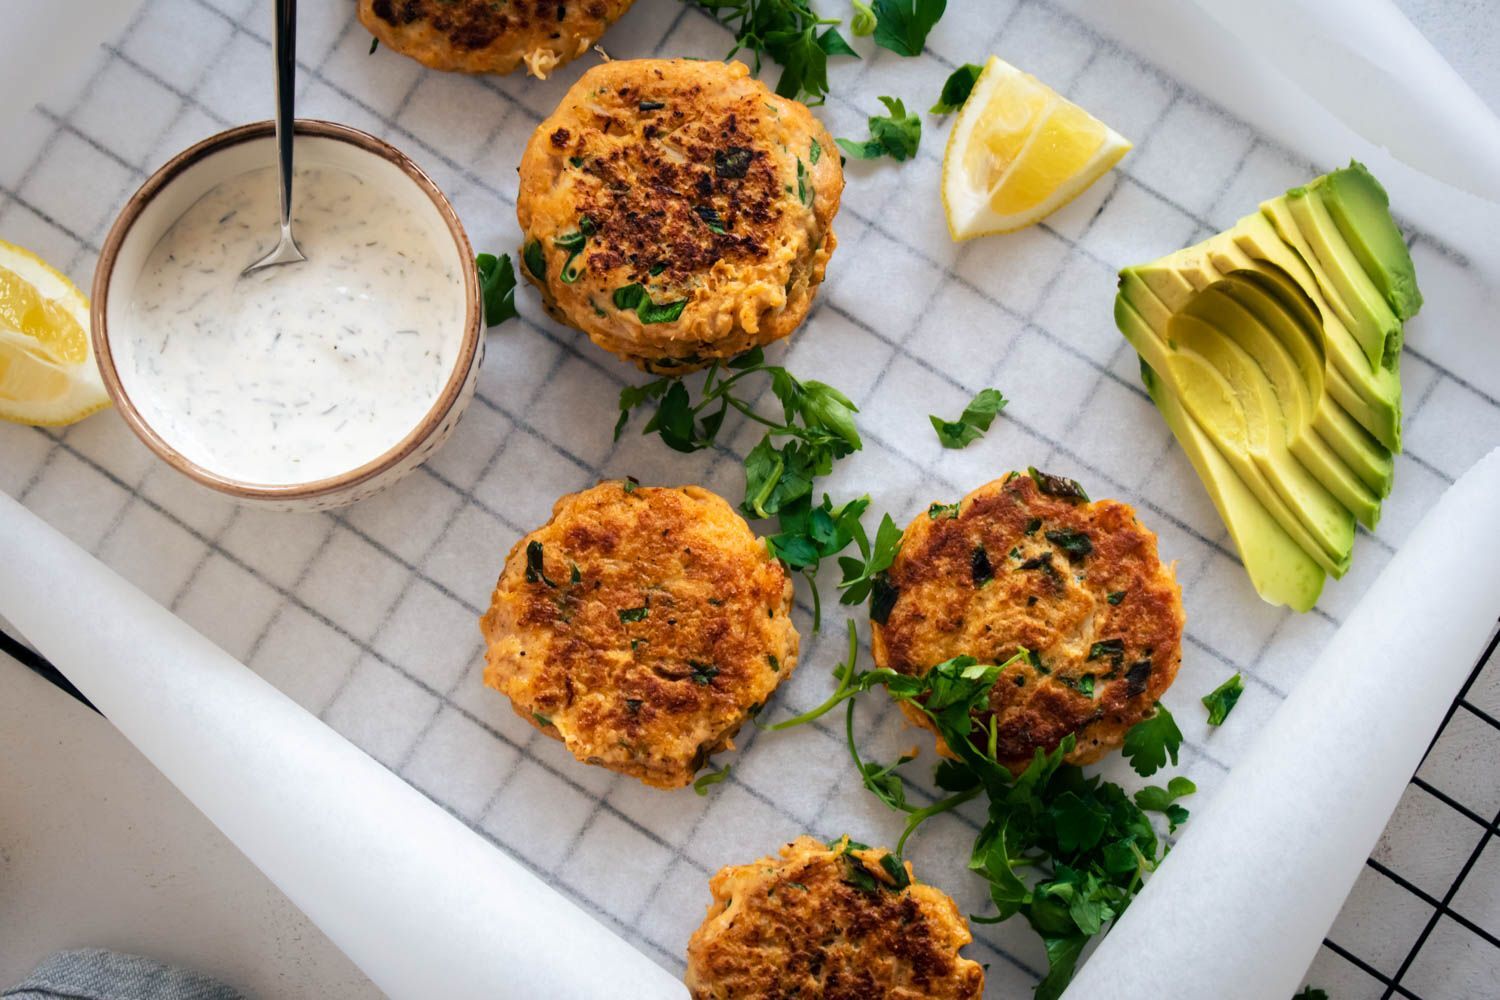 Fish cakes made with cod and herbs baked until crispy on a baking sheet with lemon and dipping sauce.